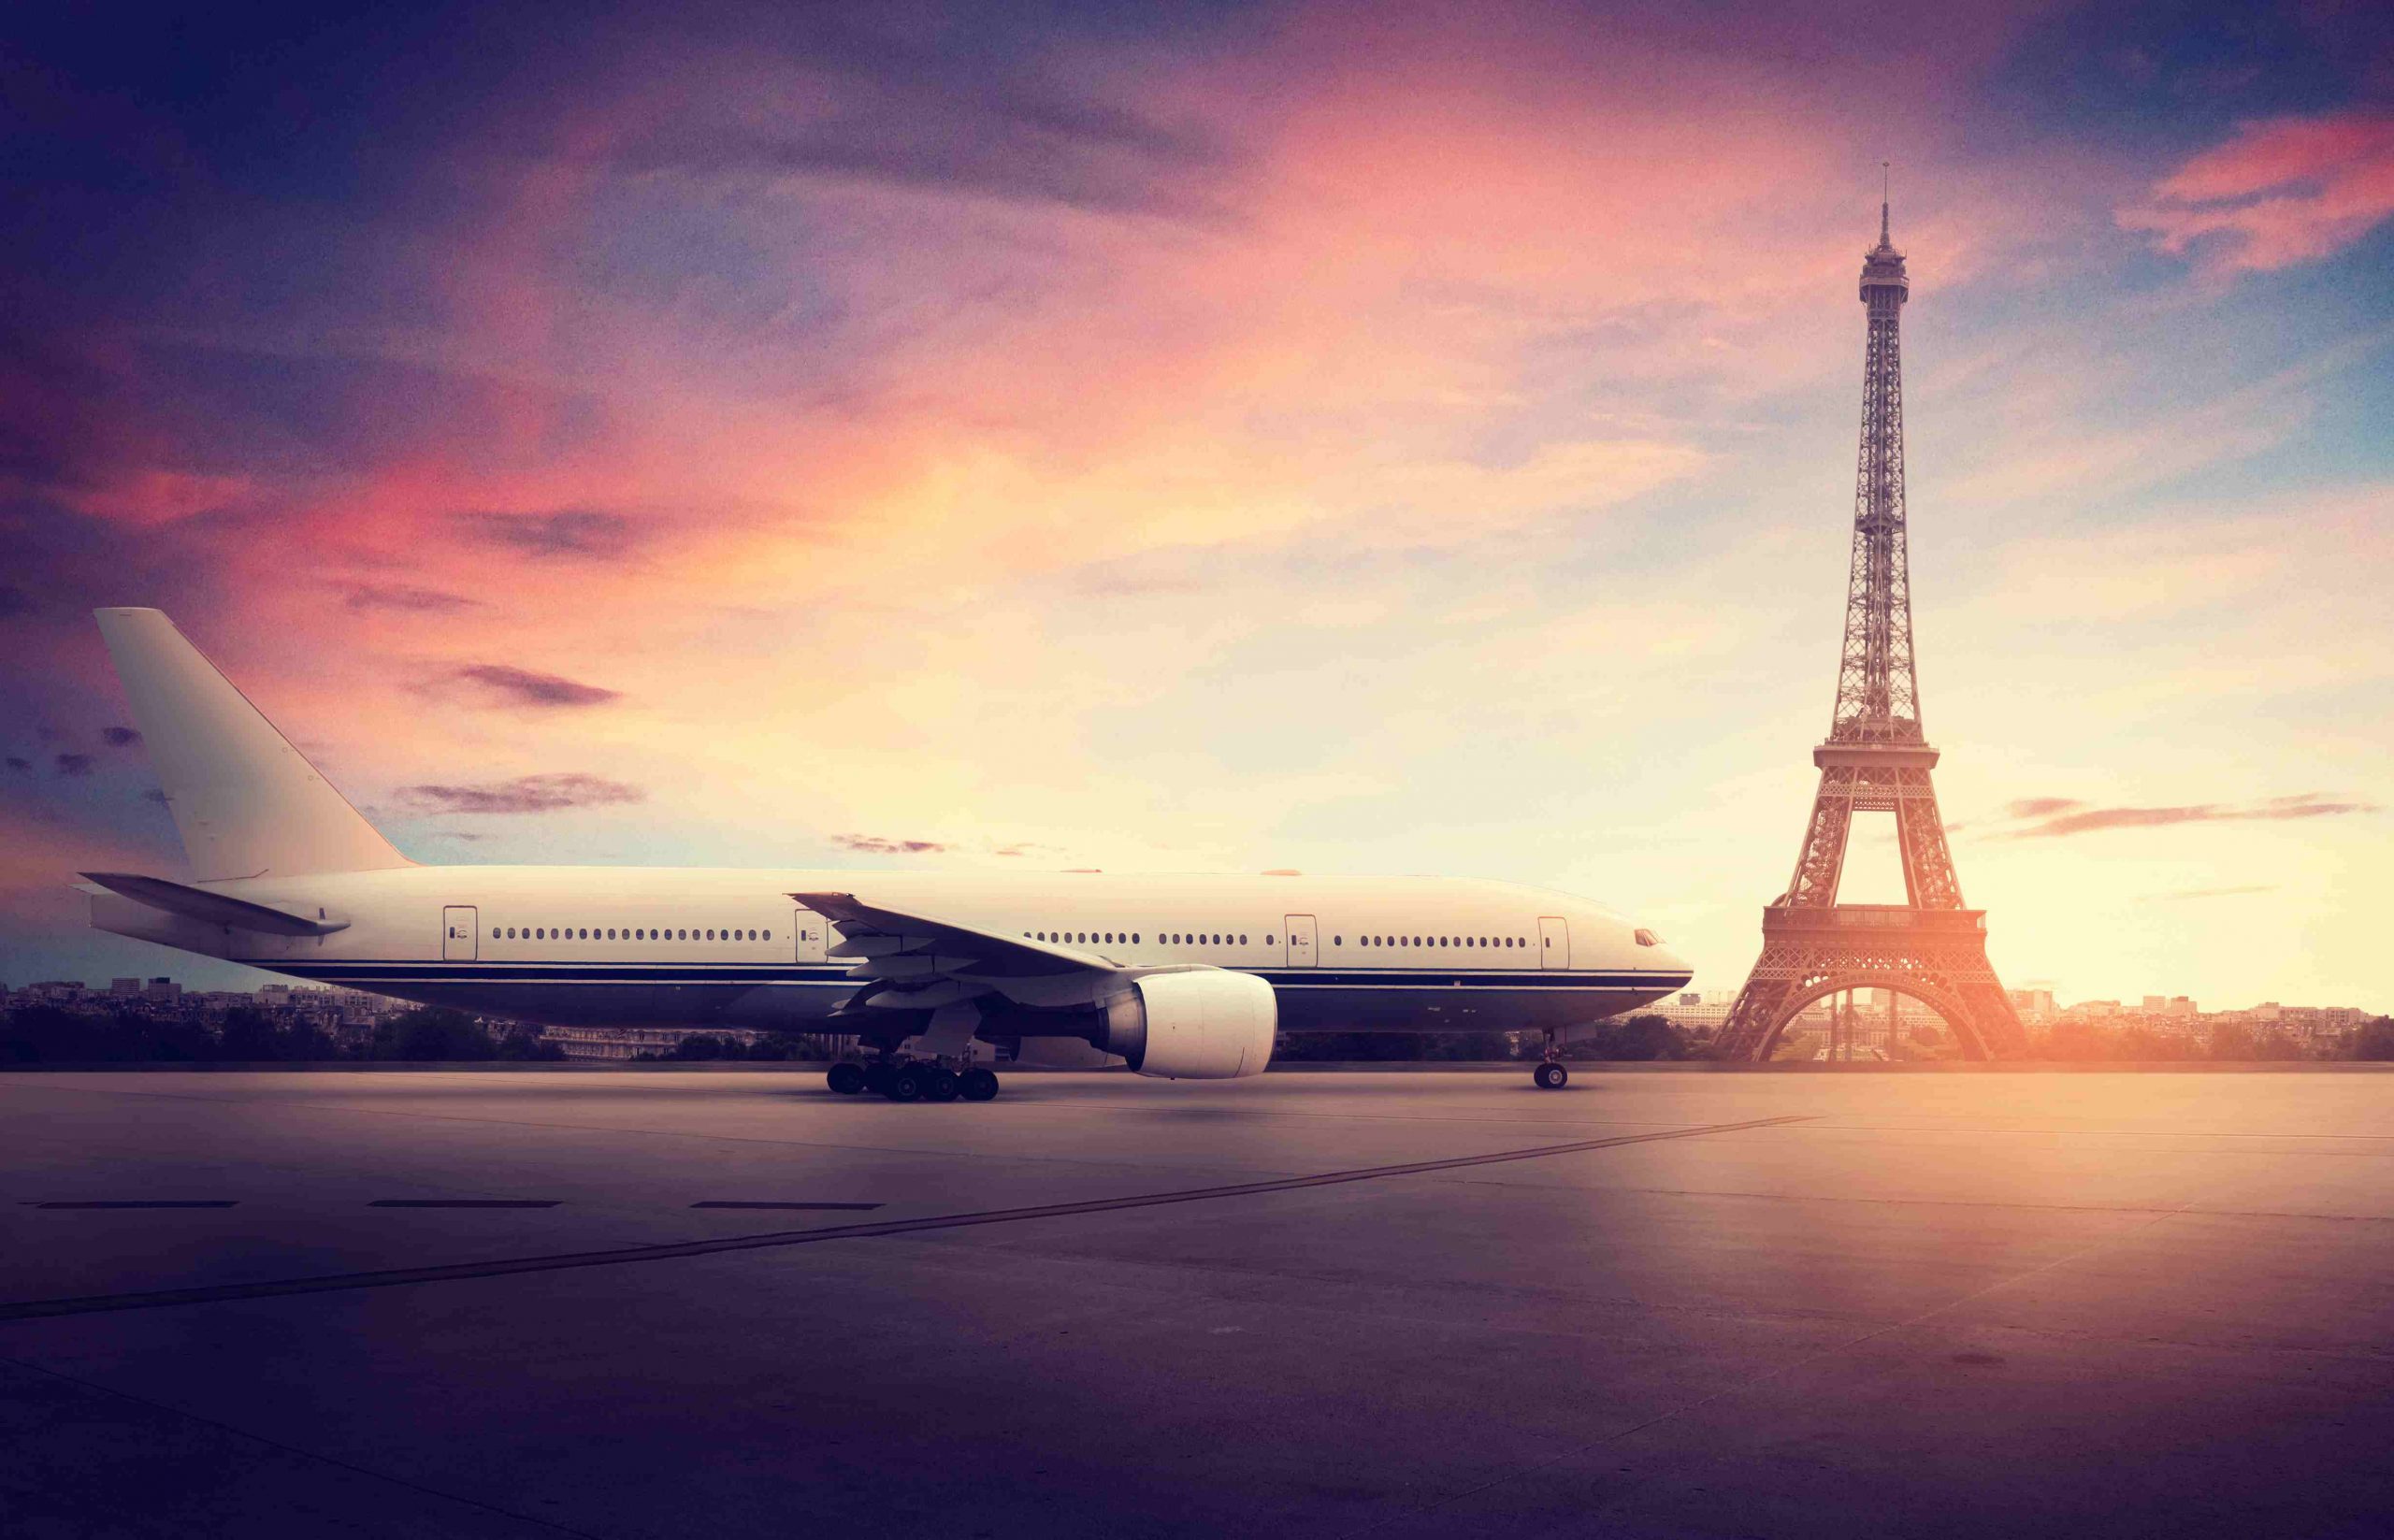 Paris Airport Transfers - Welcome to Paris with peace of mind